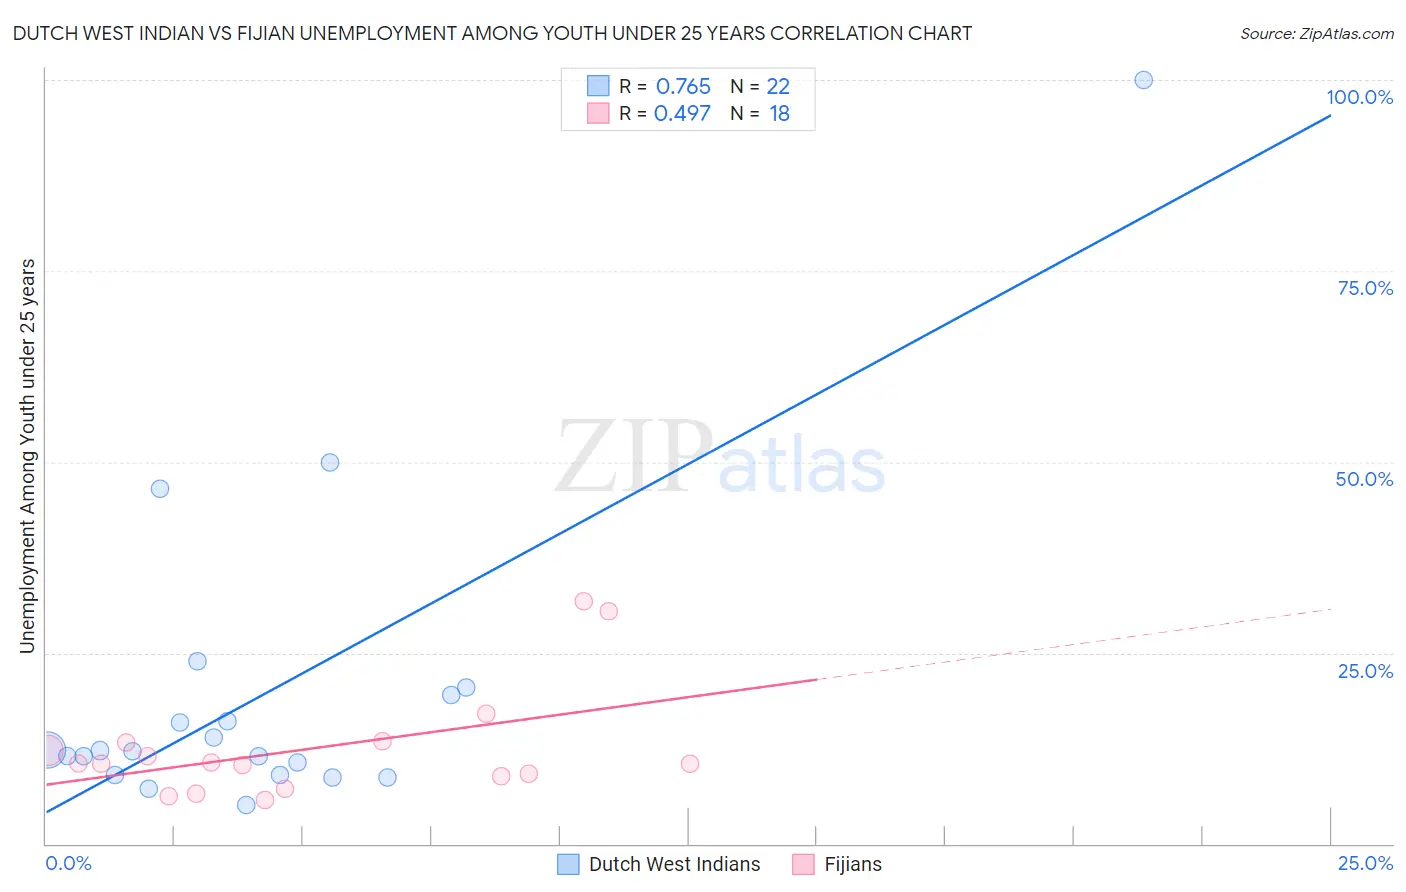 Dutch West Indian vs Fijian Unemployment Among Youth under 25 years